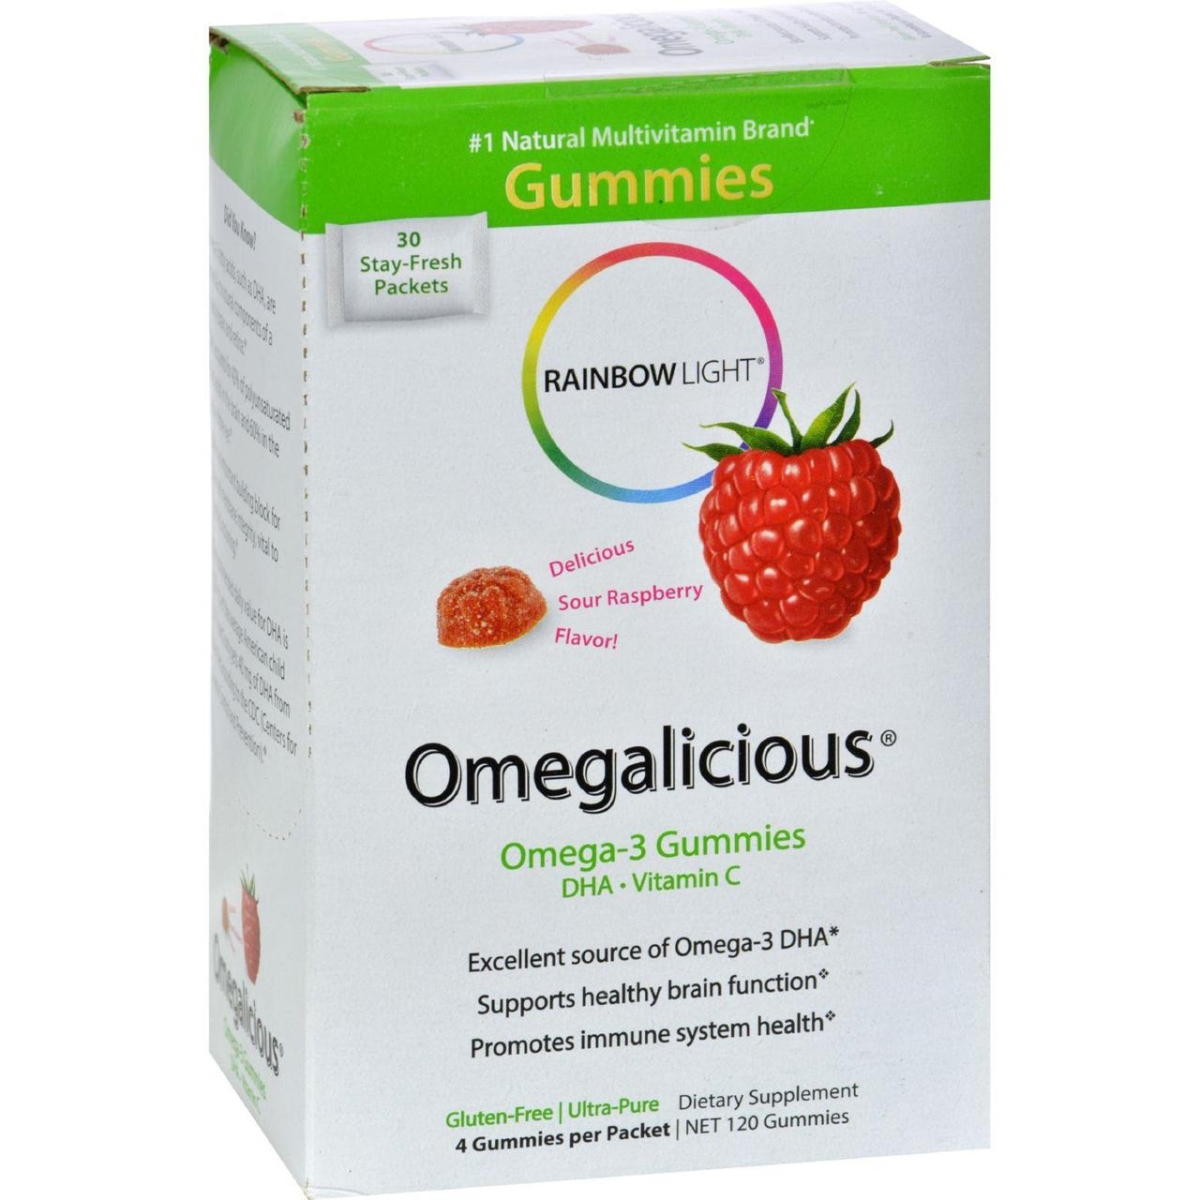 Hg0826016 Gummy Omegalicious Omega 3 Formula Sour Raspberry - 30 Packets